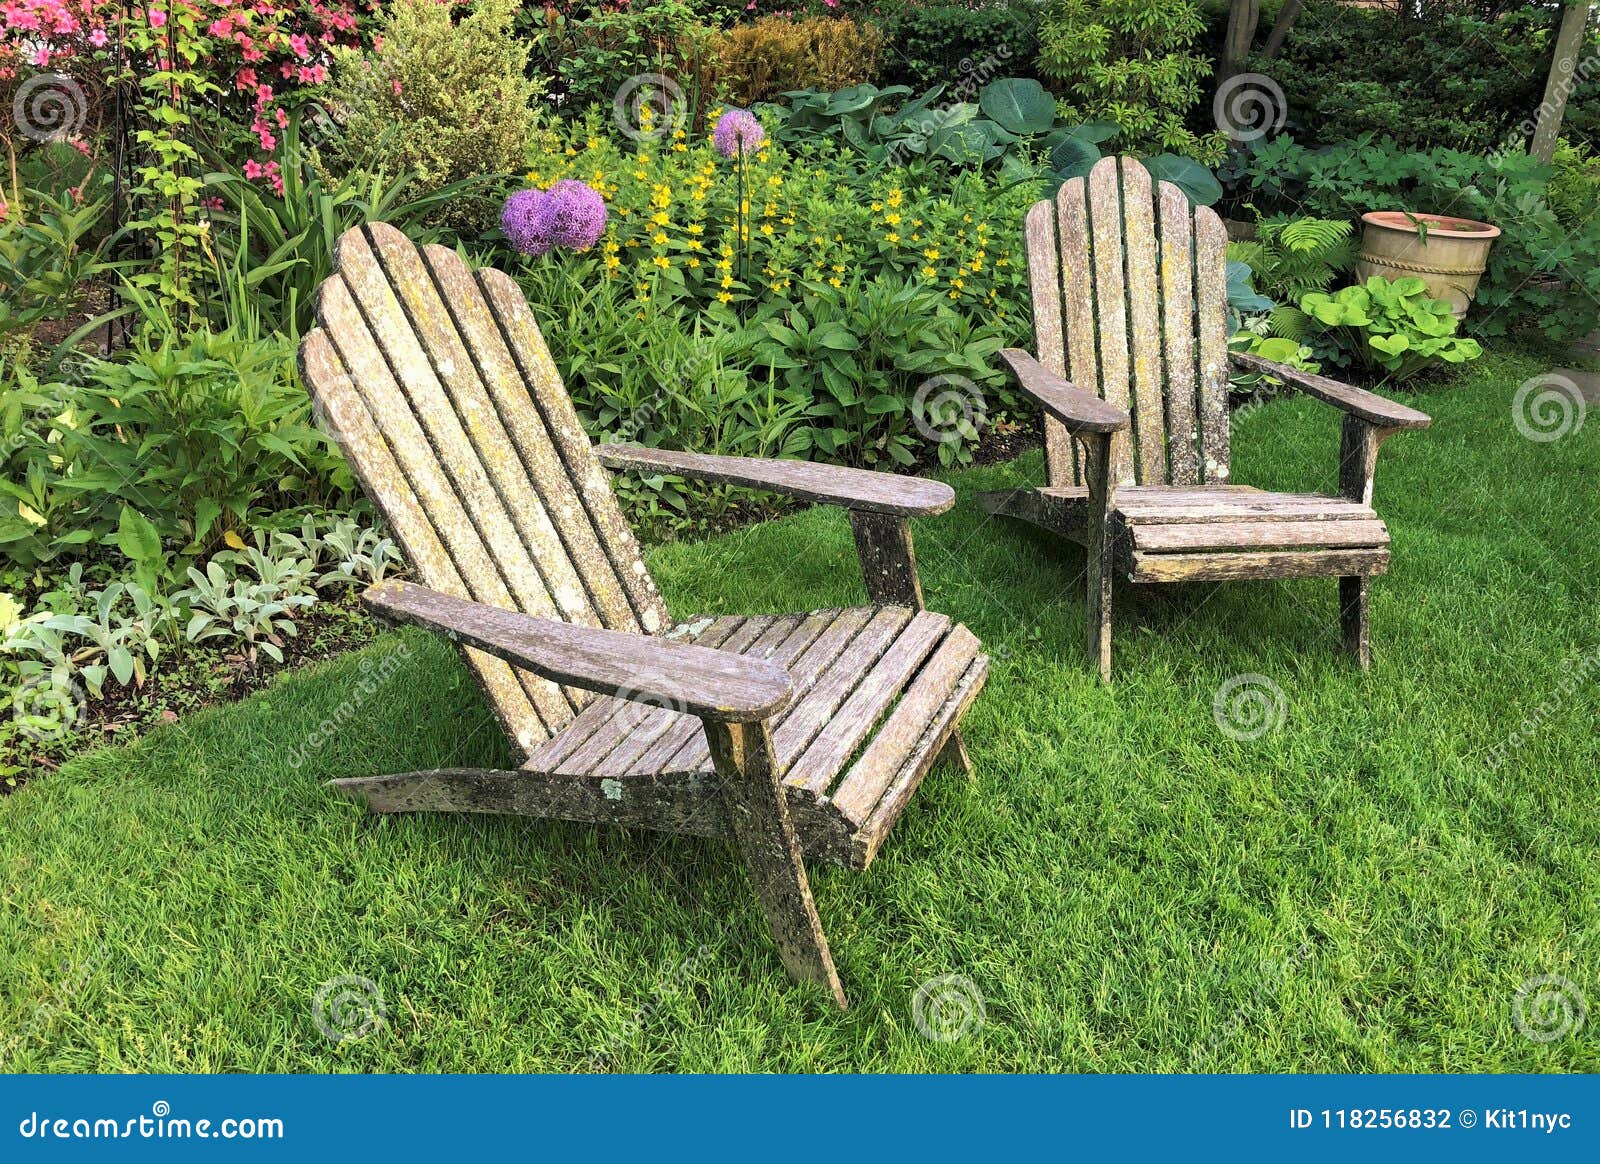 Lounging Chairs In The Garden Stock Photo Image Of Seats